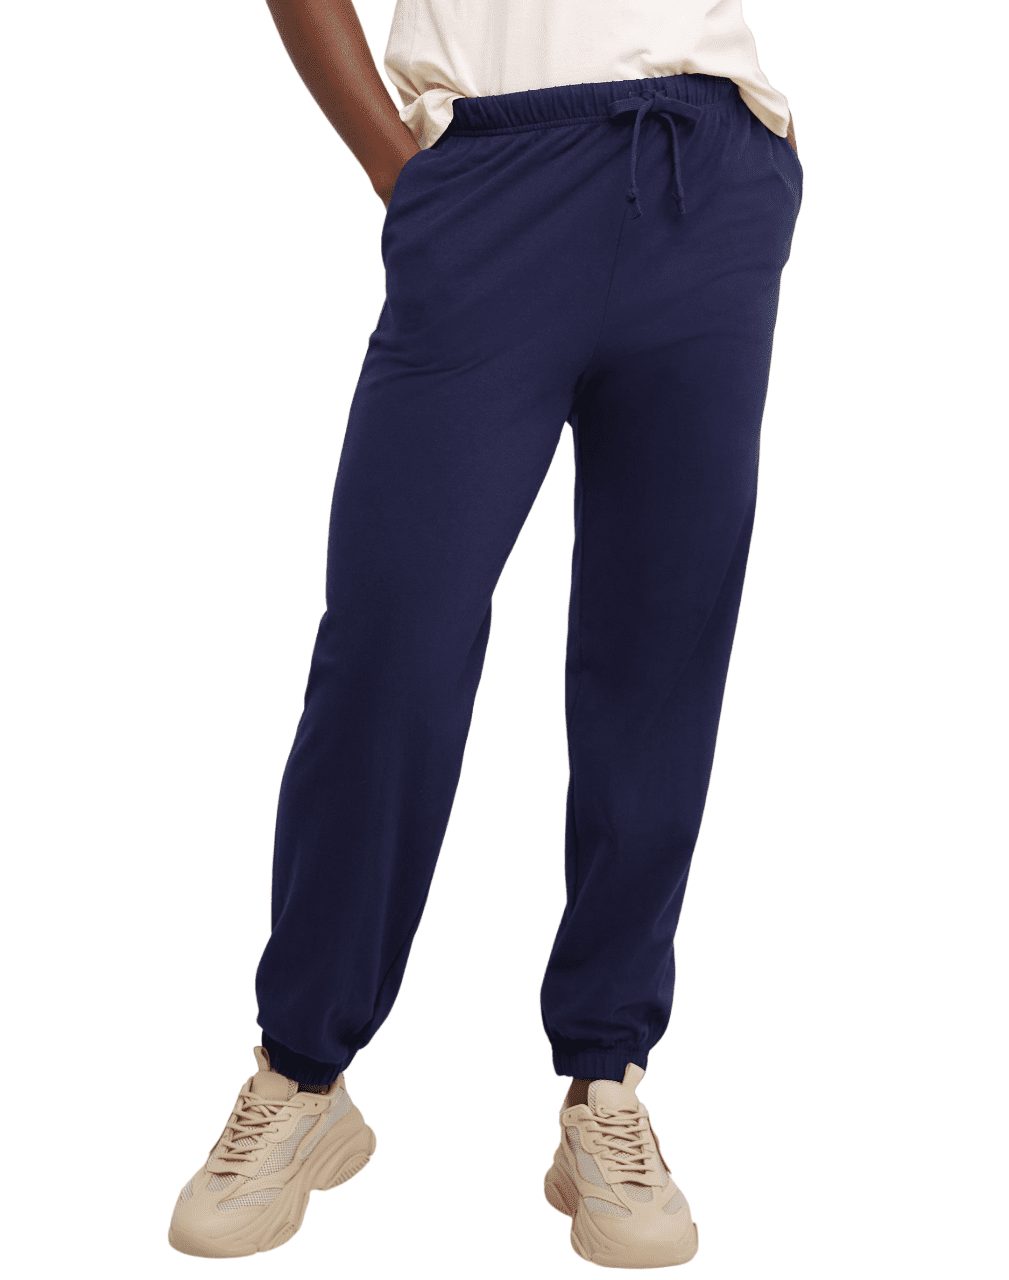 Hanes Womens Essentials Cotton Jersey Joggers, 29"